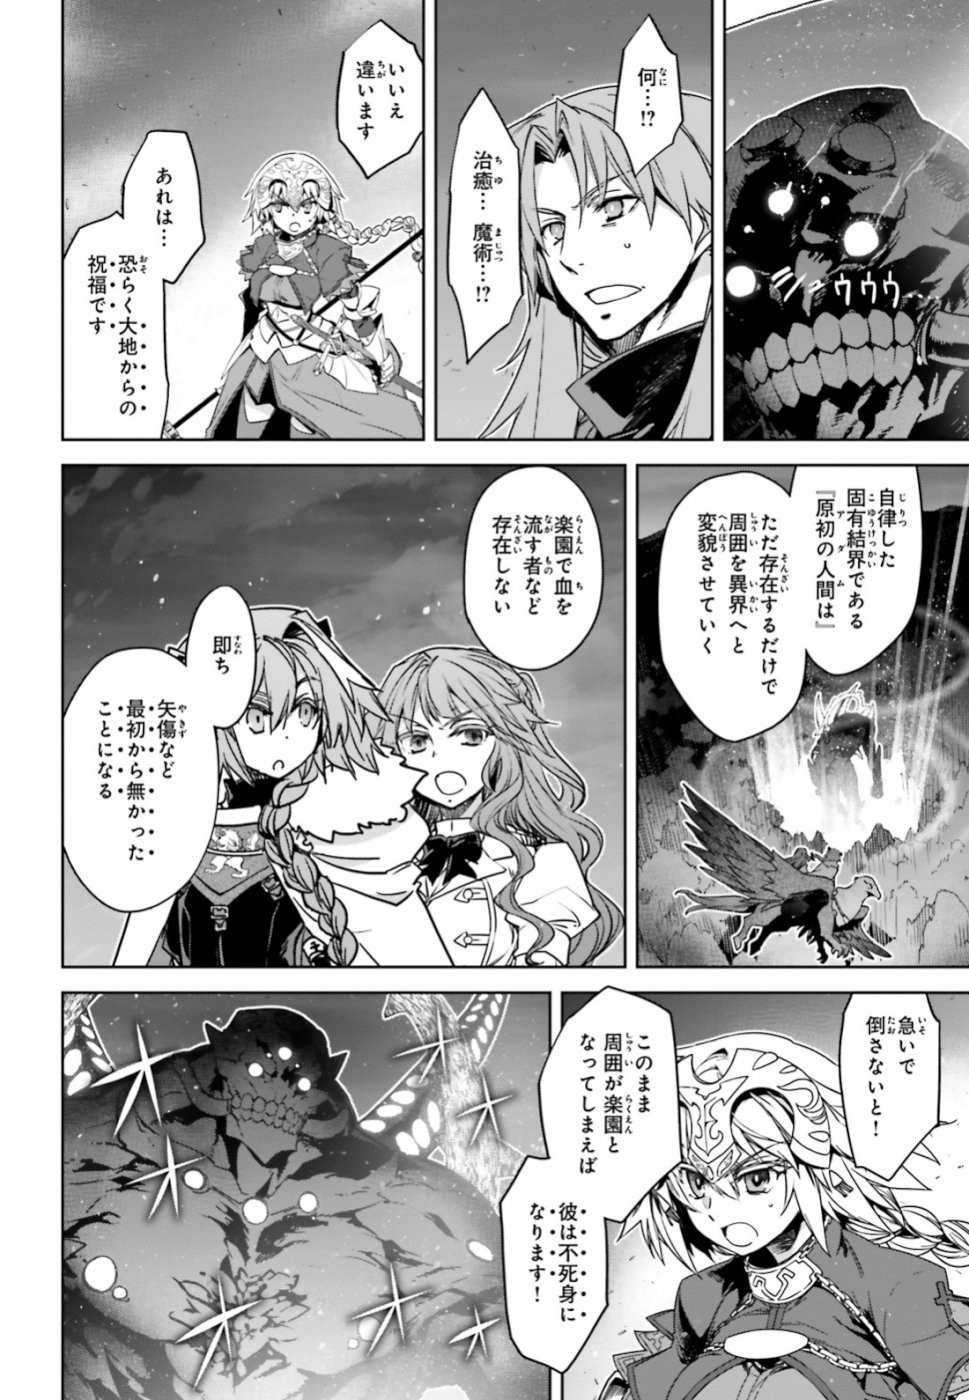 Fate-Apocrypha - Chapter 35 - Page 14